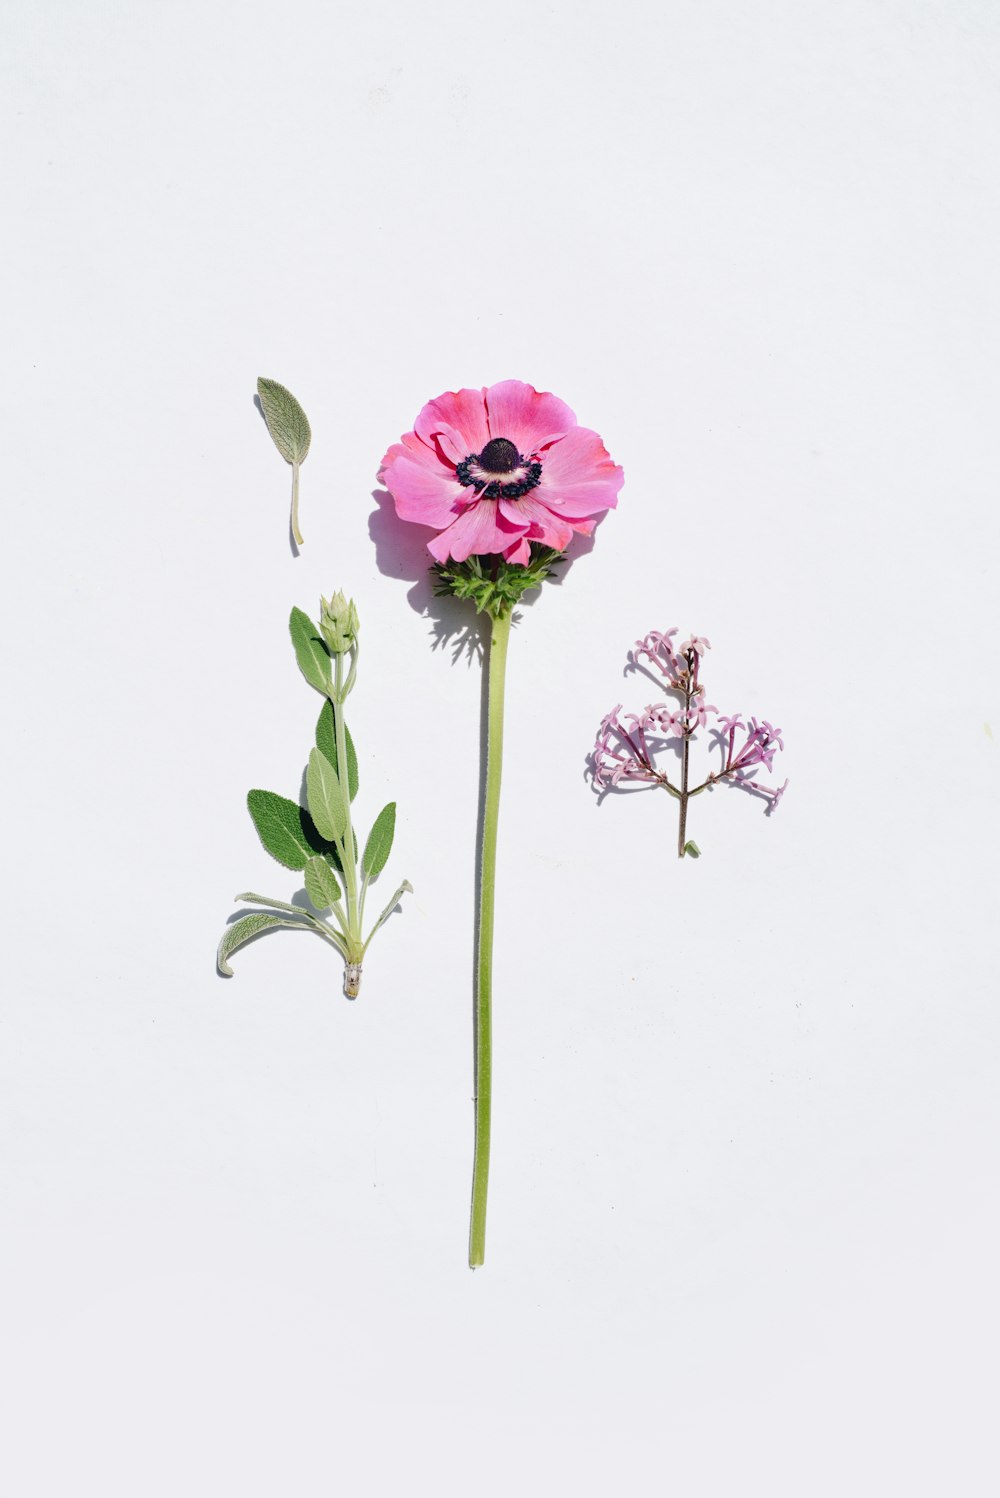 a pink flower and a green stem on a white background